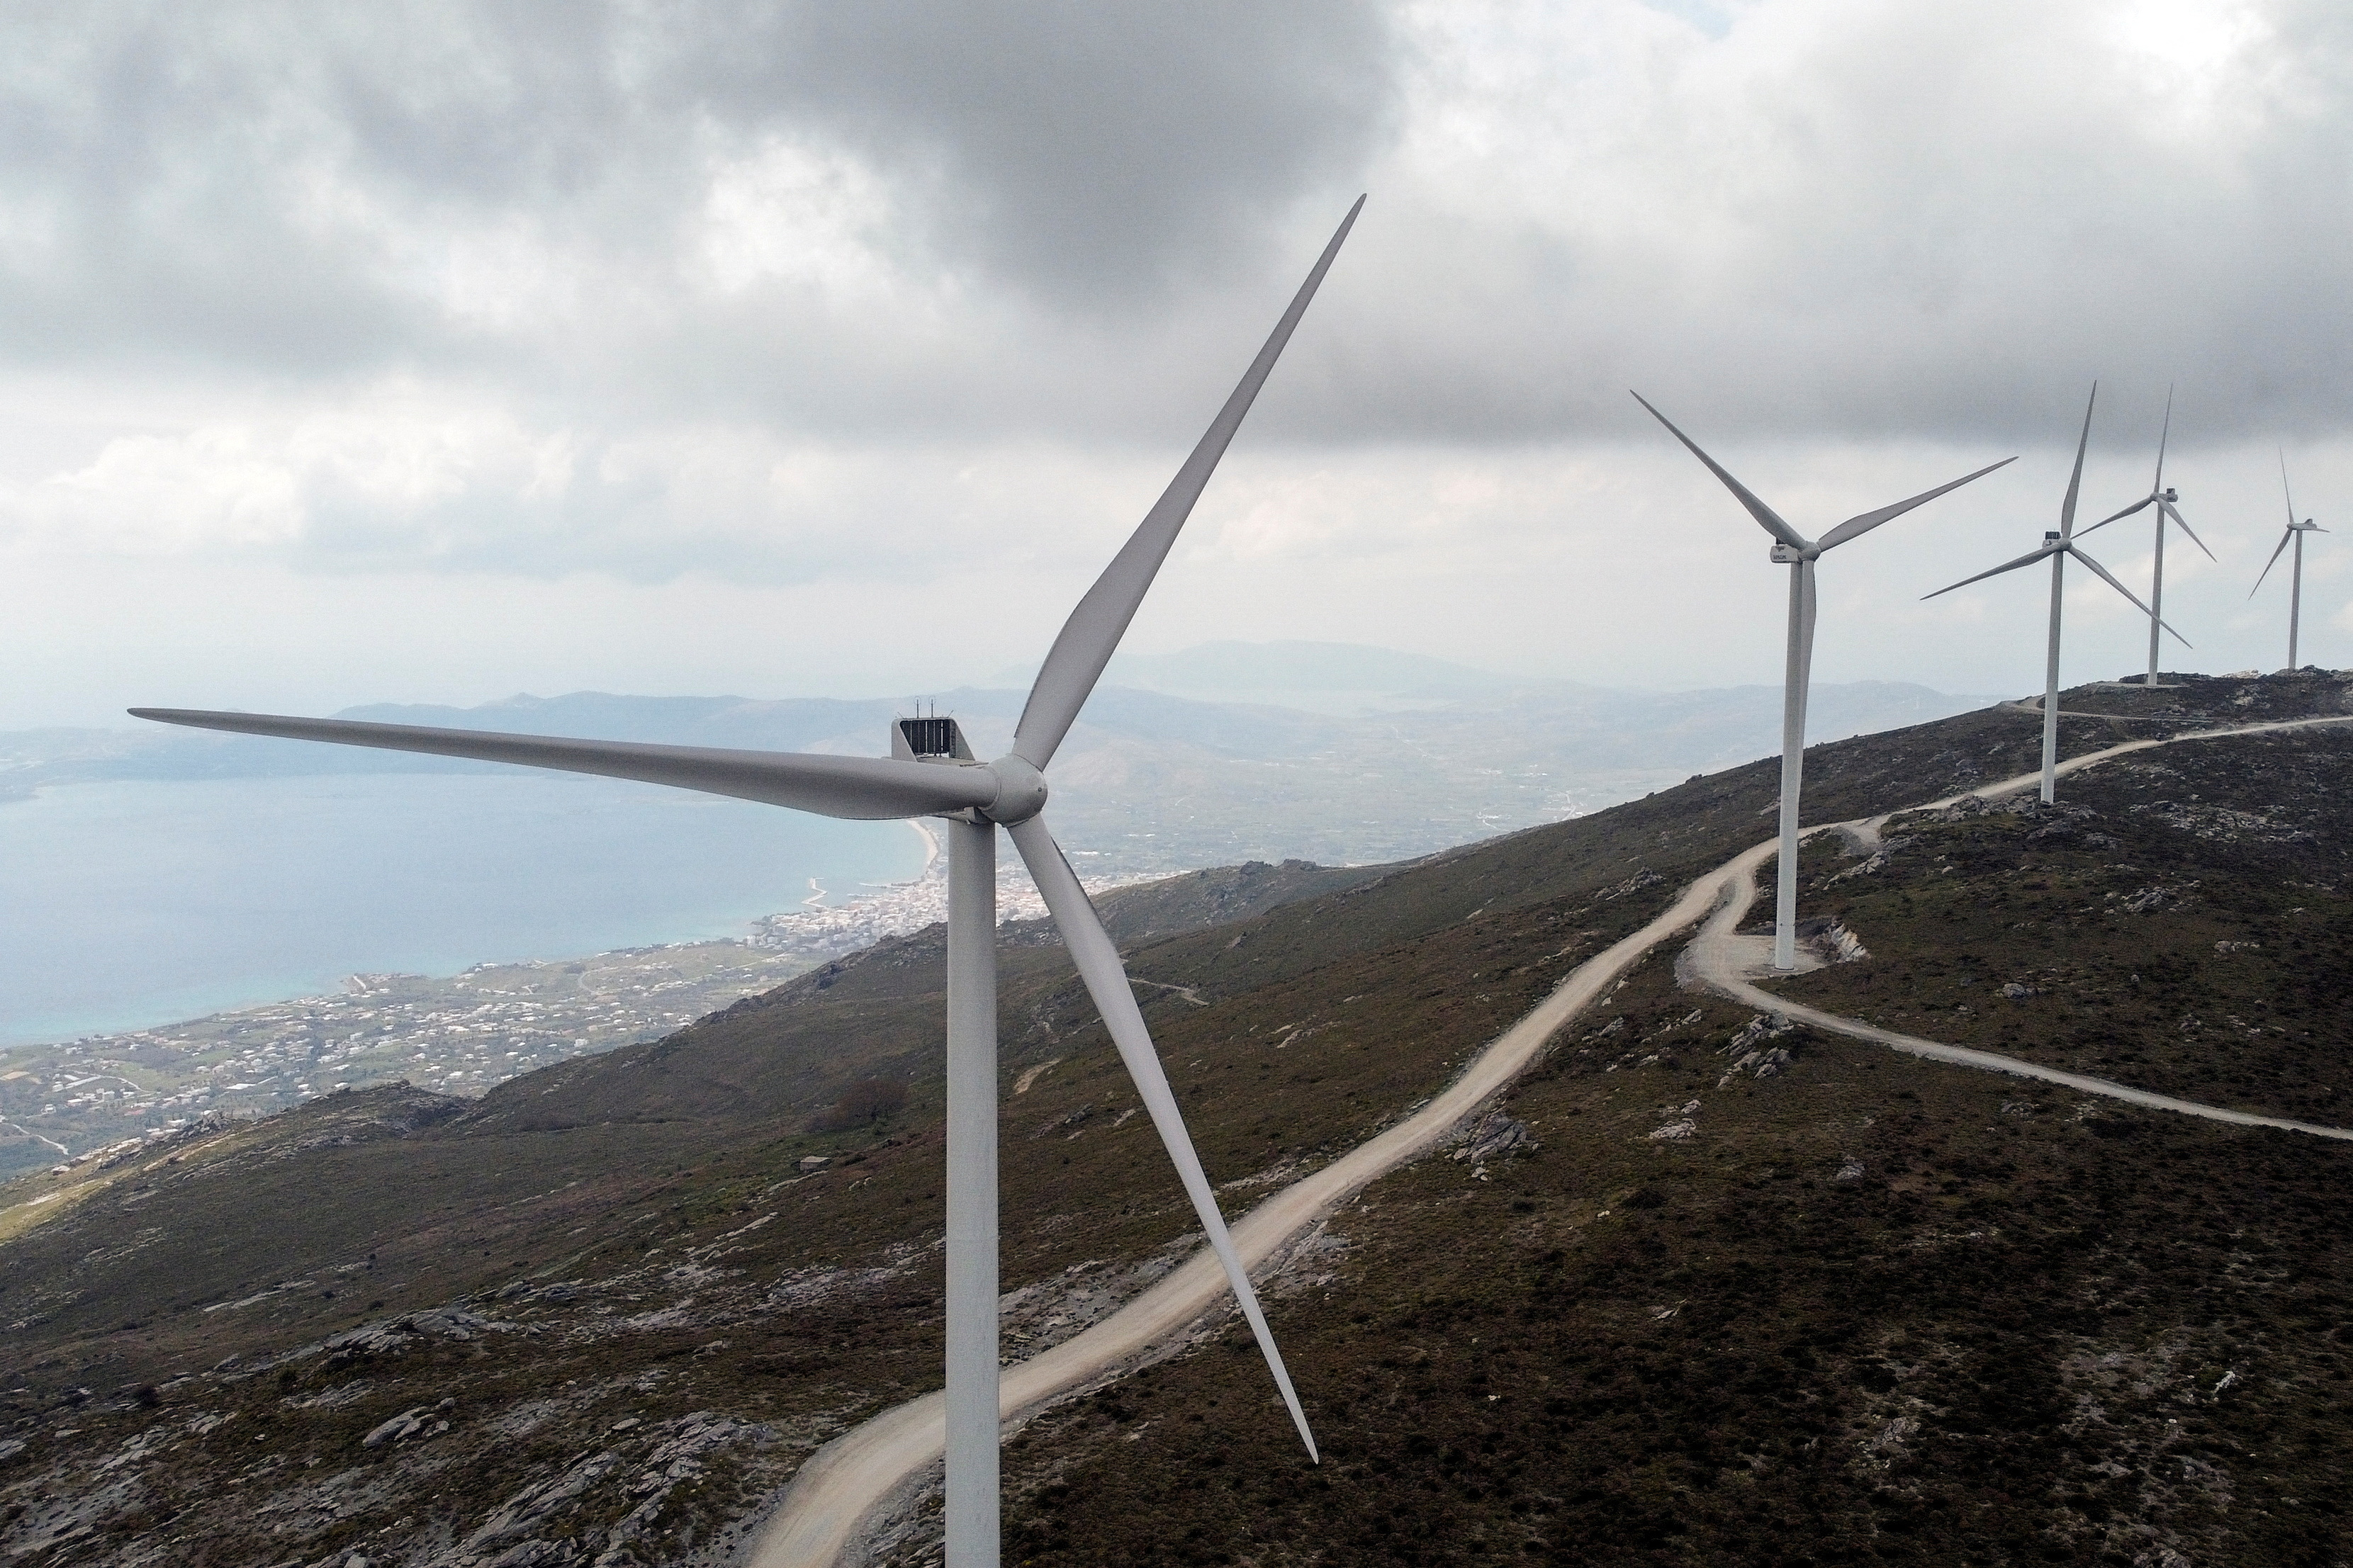 Wind turbines are seen on a mountain near the town of Karystos, on the island of Evia